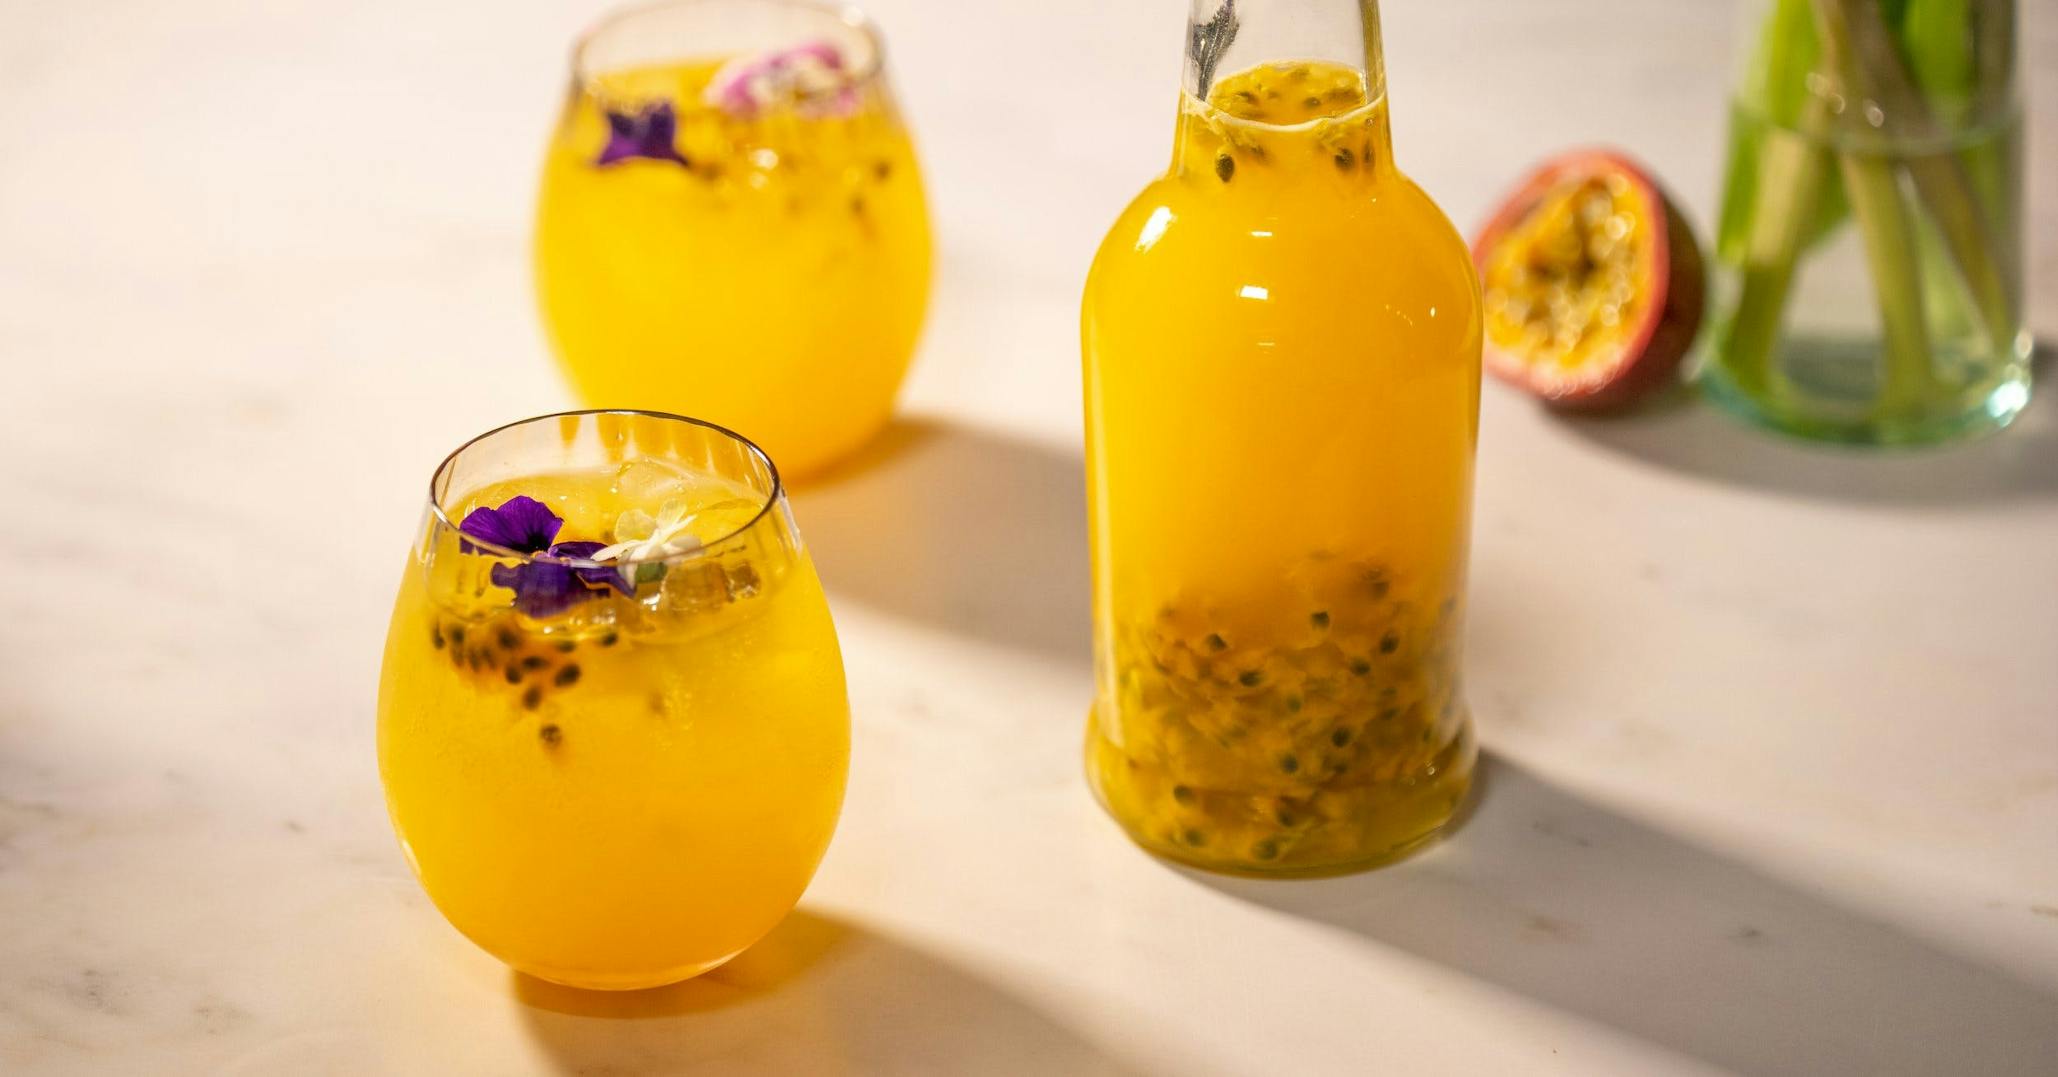 Here's how to make your own gorgeous passion fruit gin at home